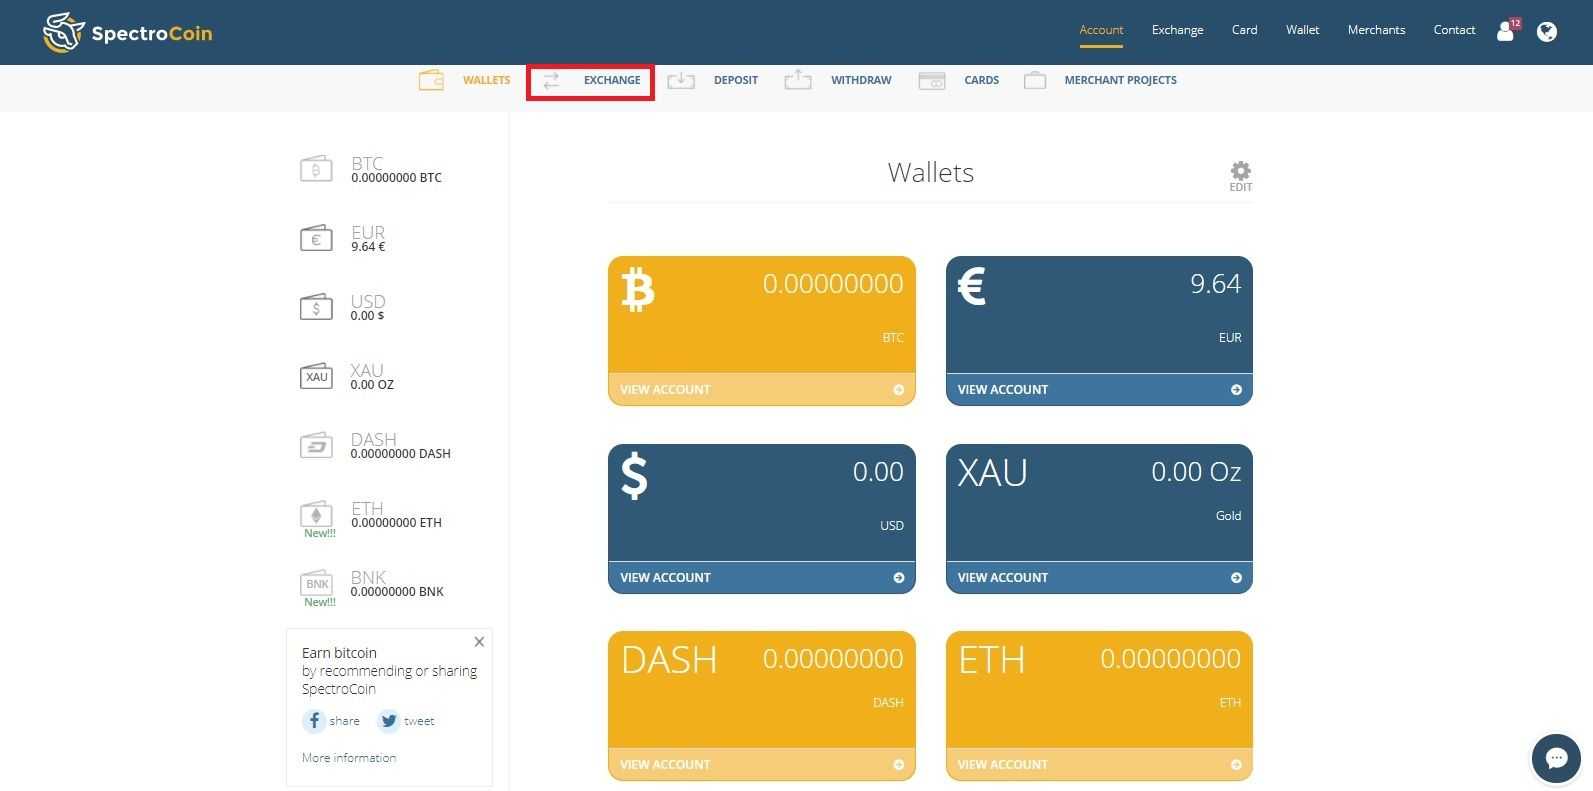 SpectroCoin wallets page with a highlighted "exchange" option on the top menu